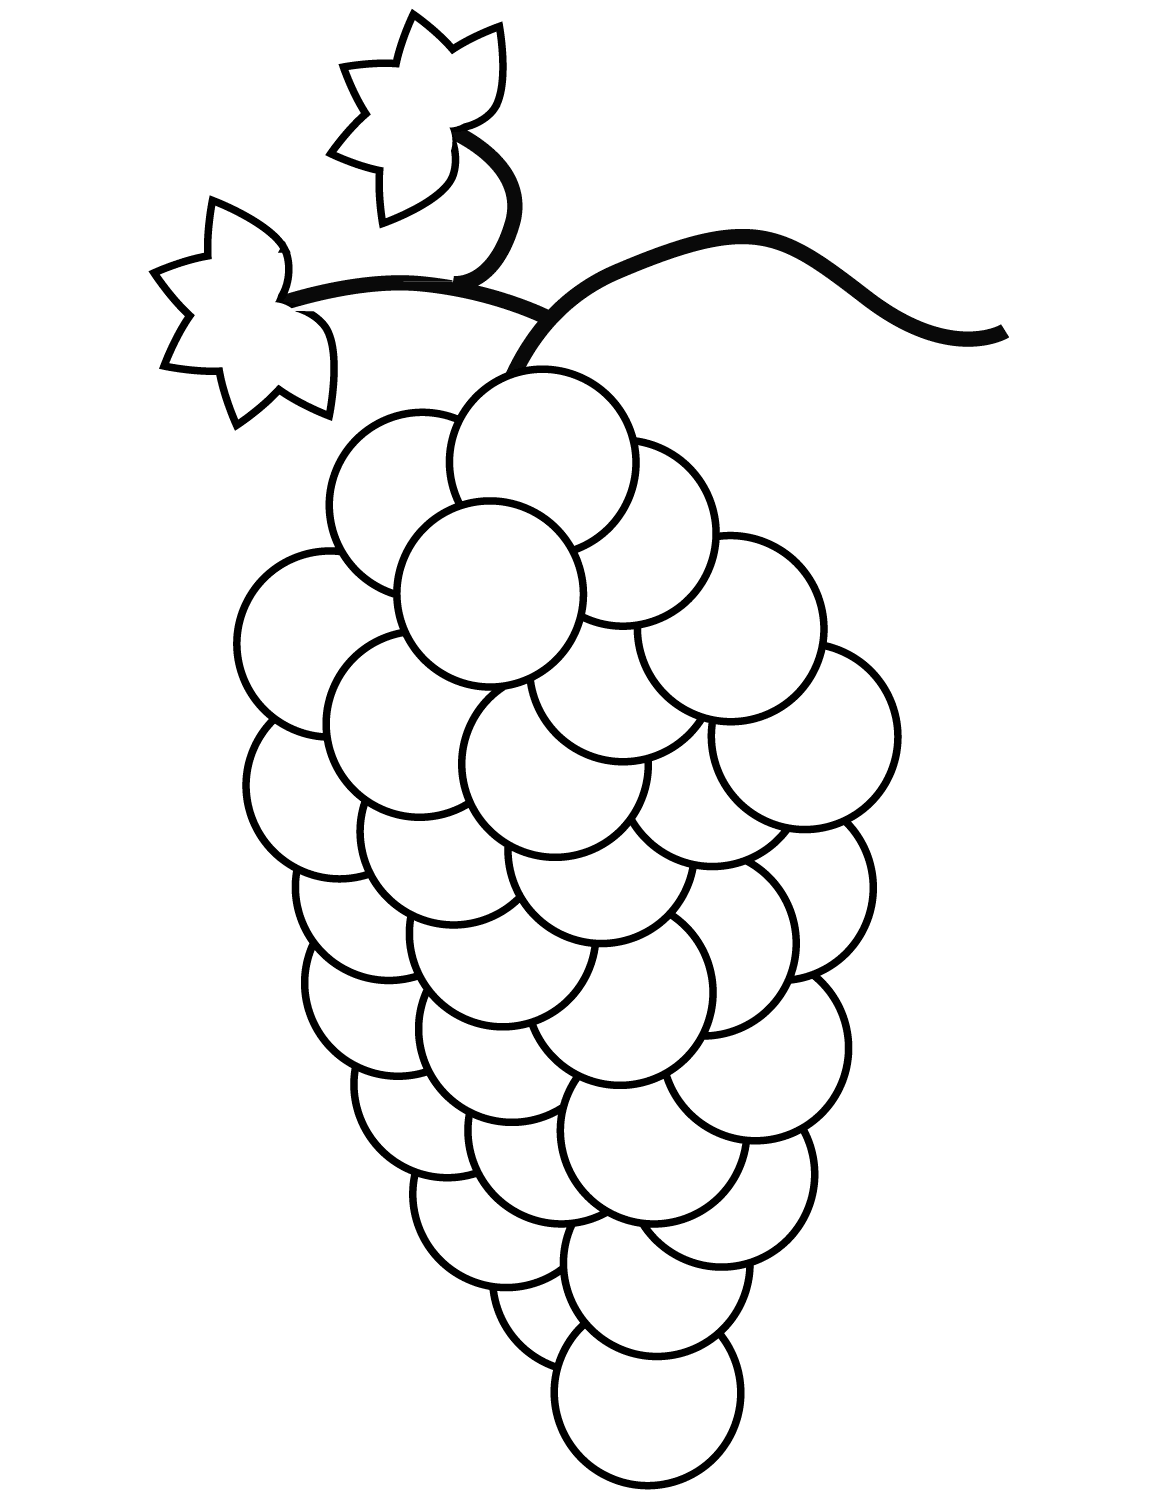 Grapes Coloring Pages Best Coloring Pages For Kids